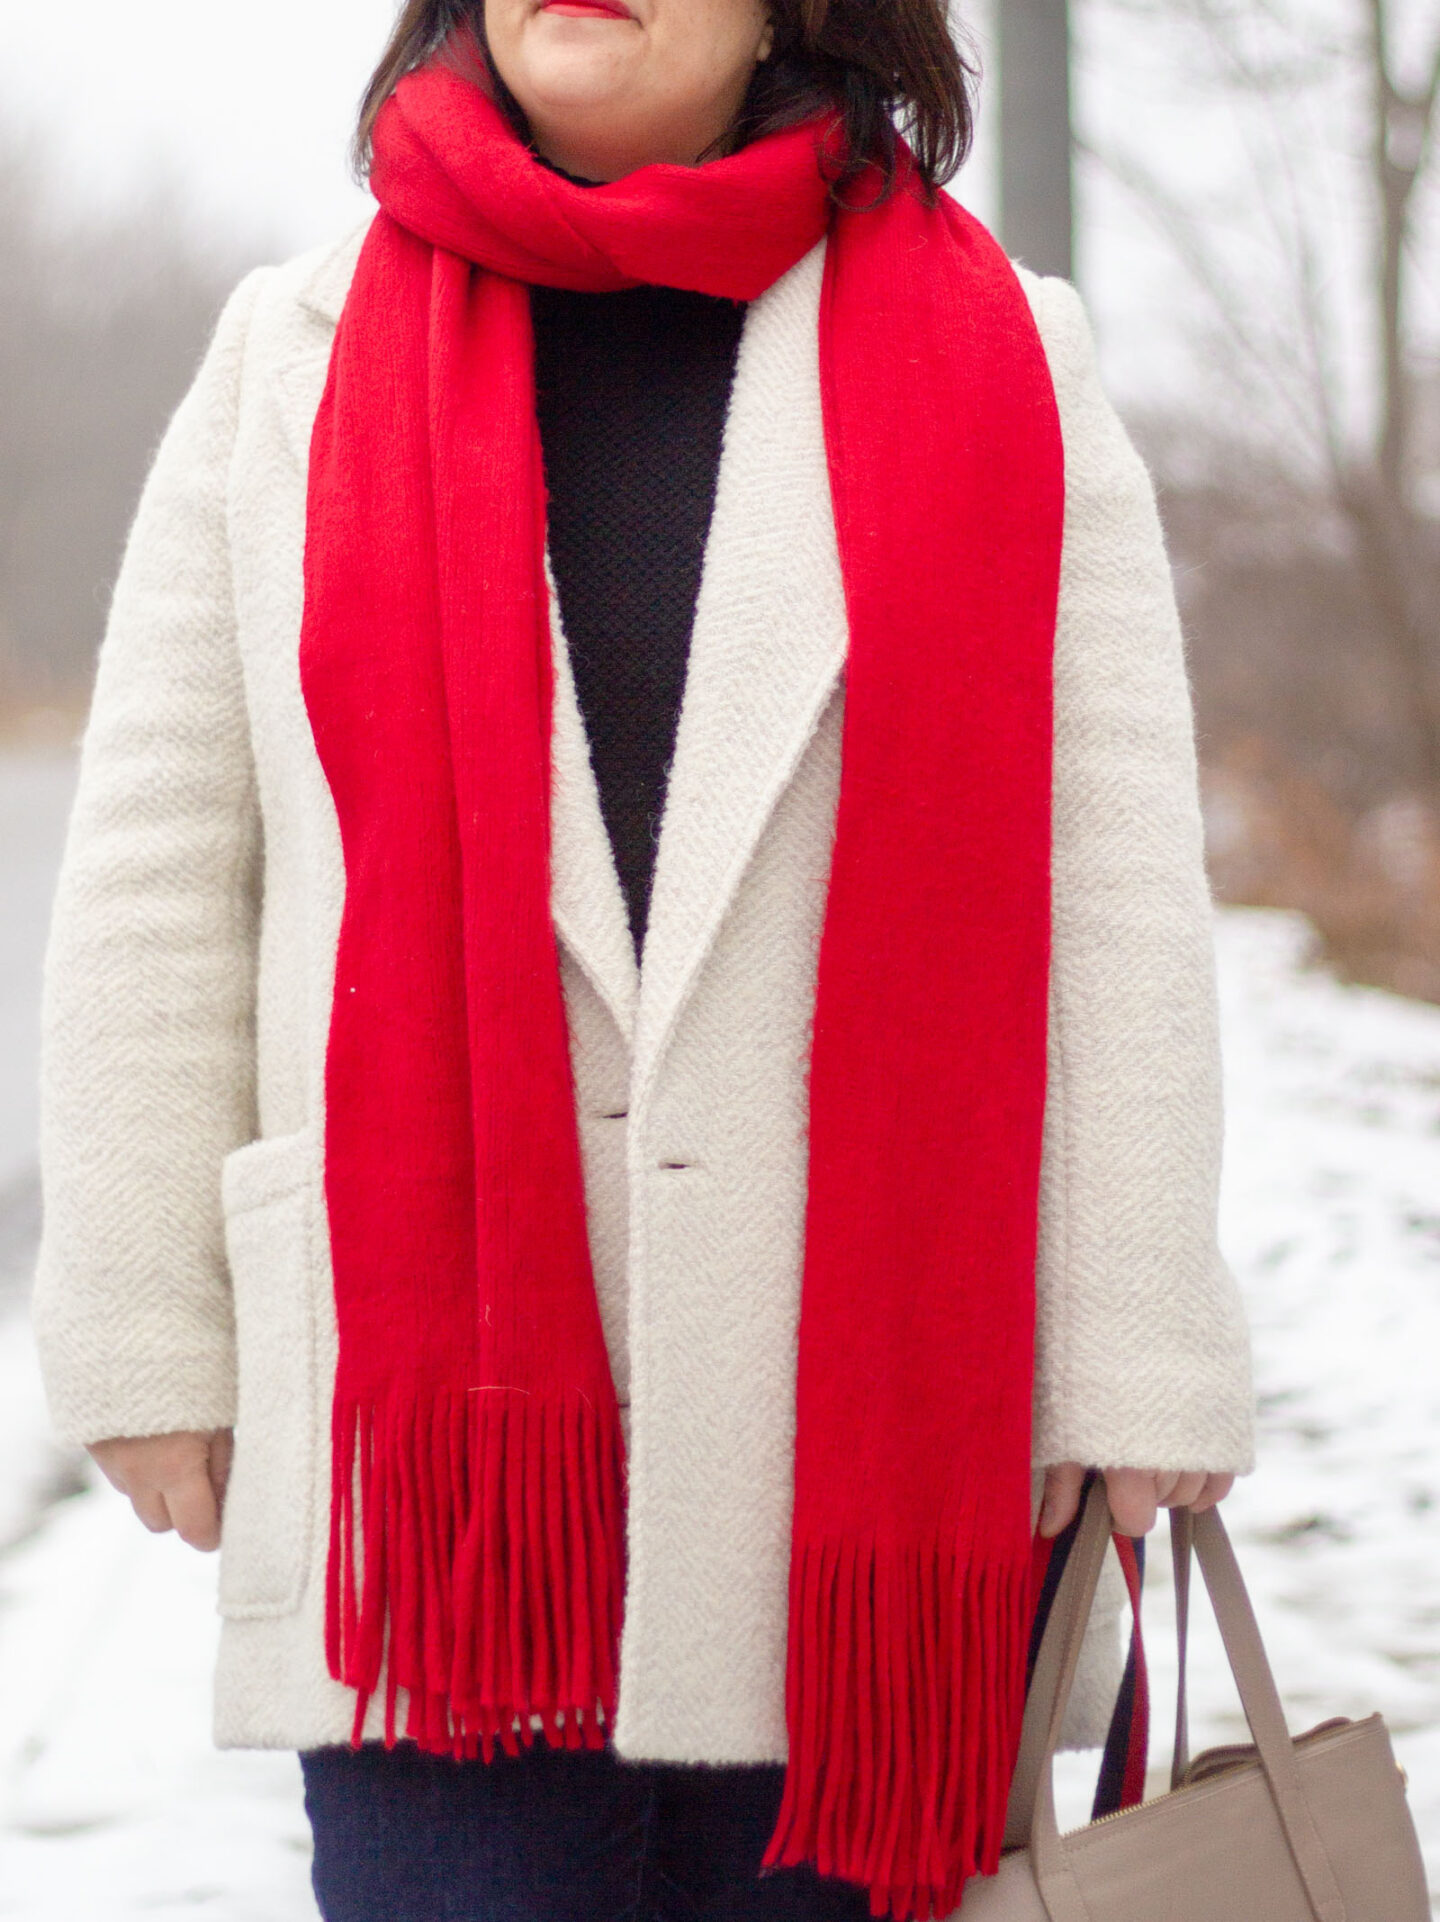 sezane harper coat, red scarf outfit